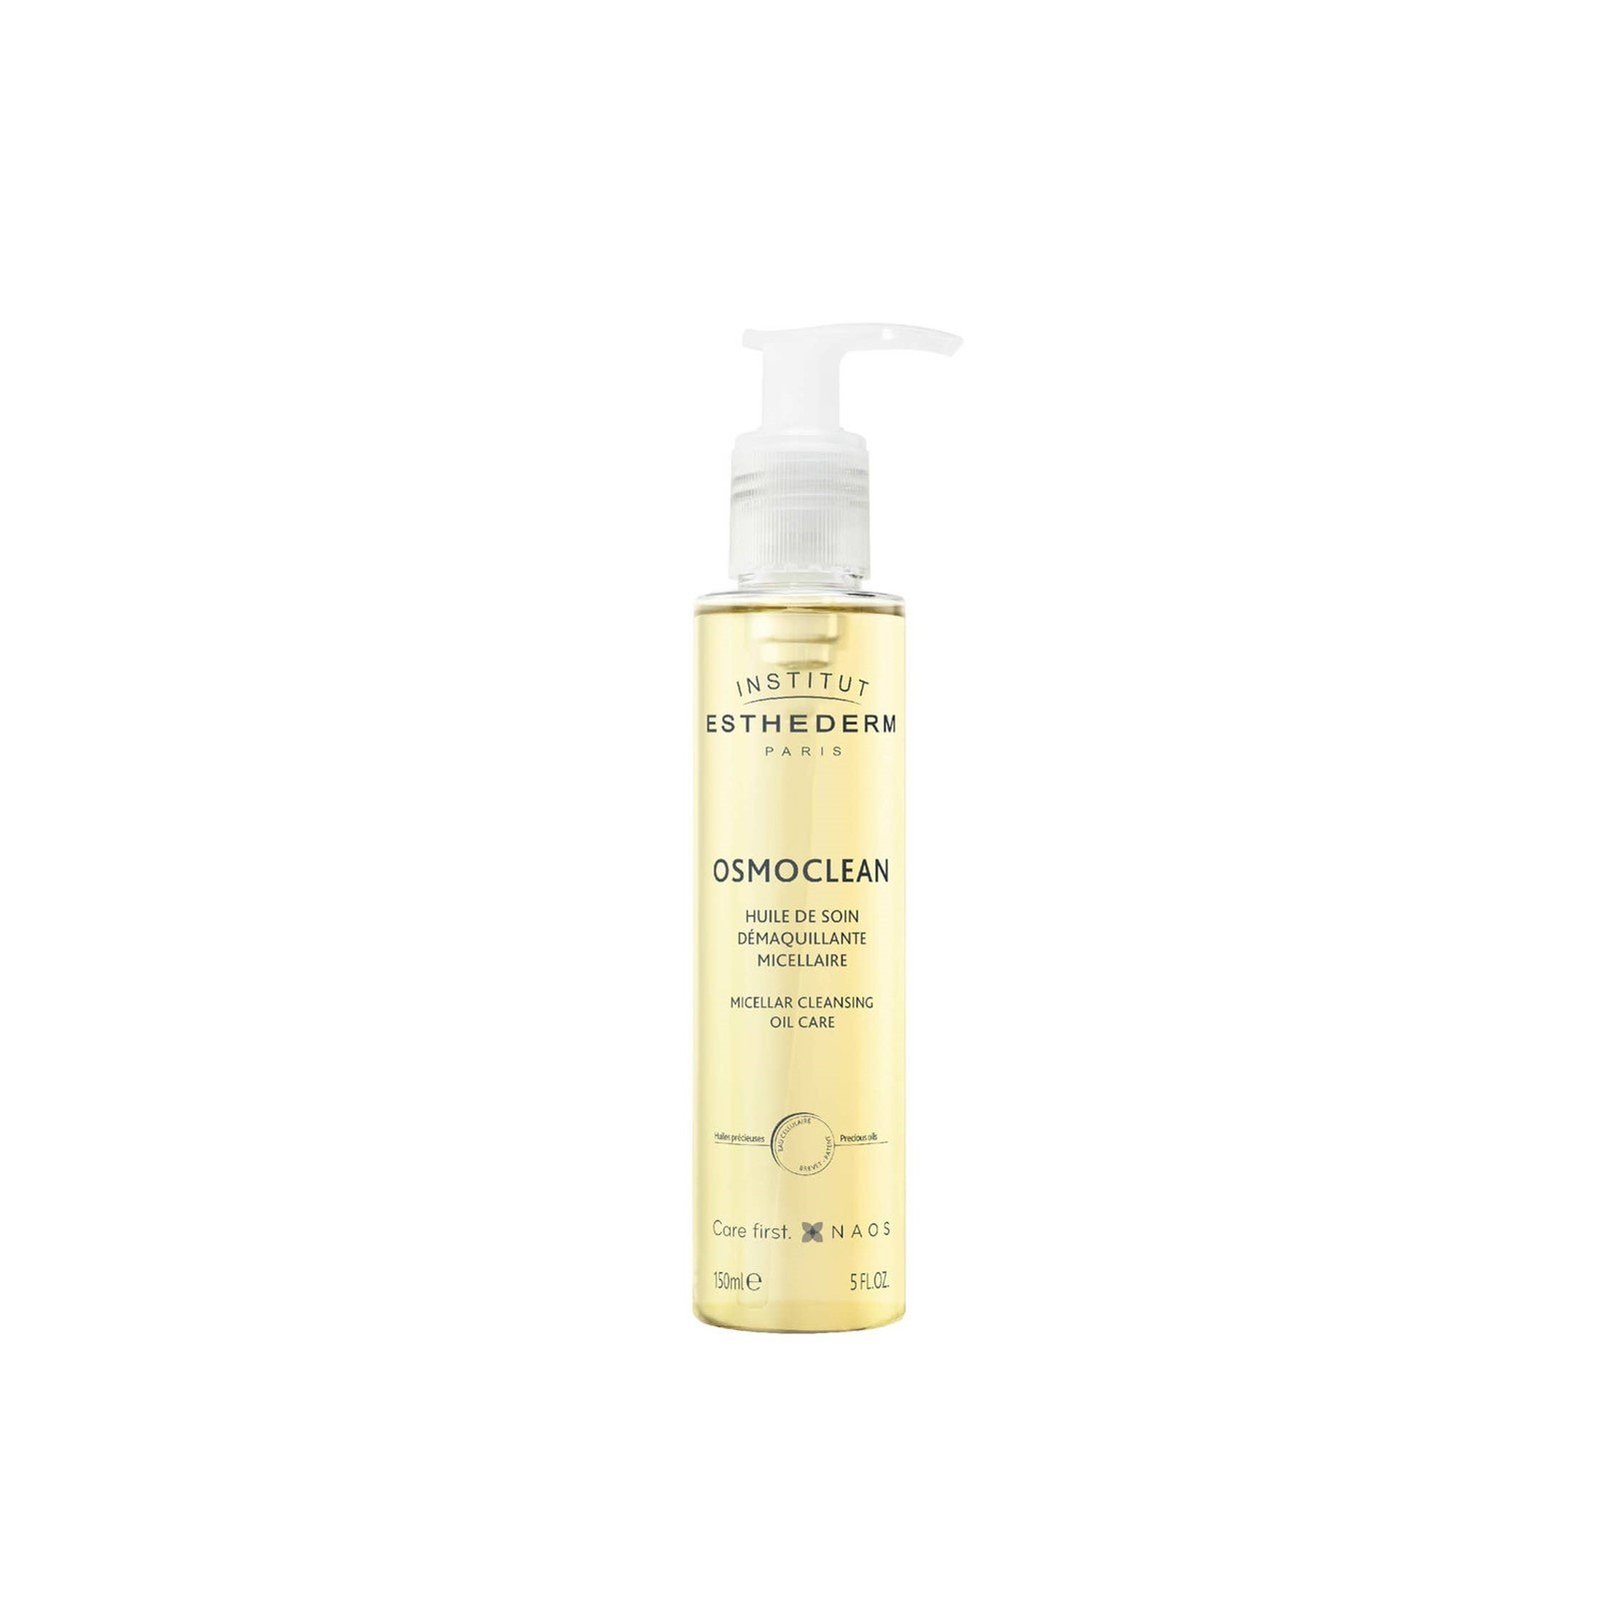 Esthederm Osmoclean Micellar Cleansing Oil Care 150ml (5floz)